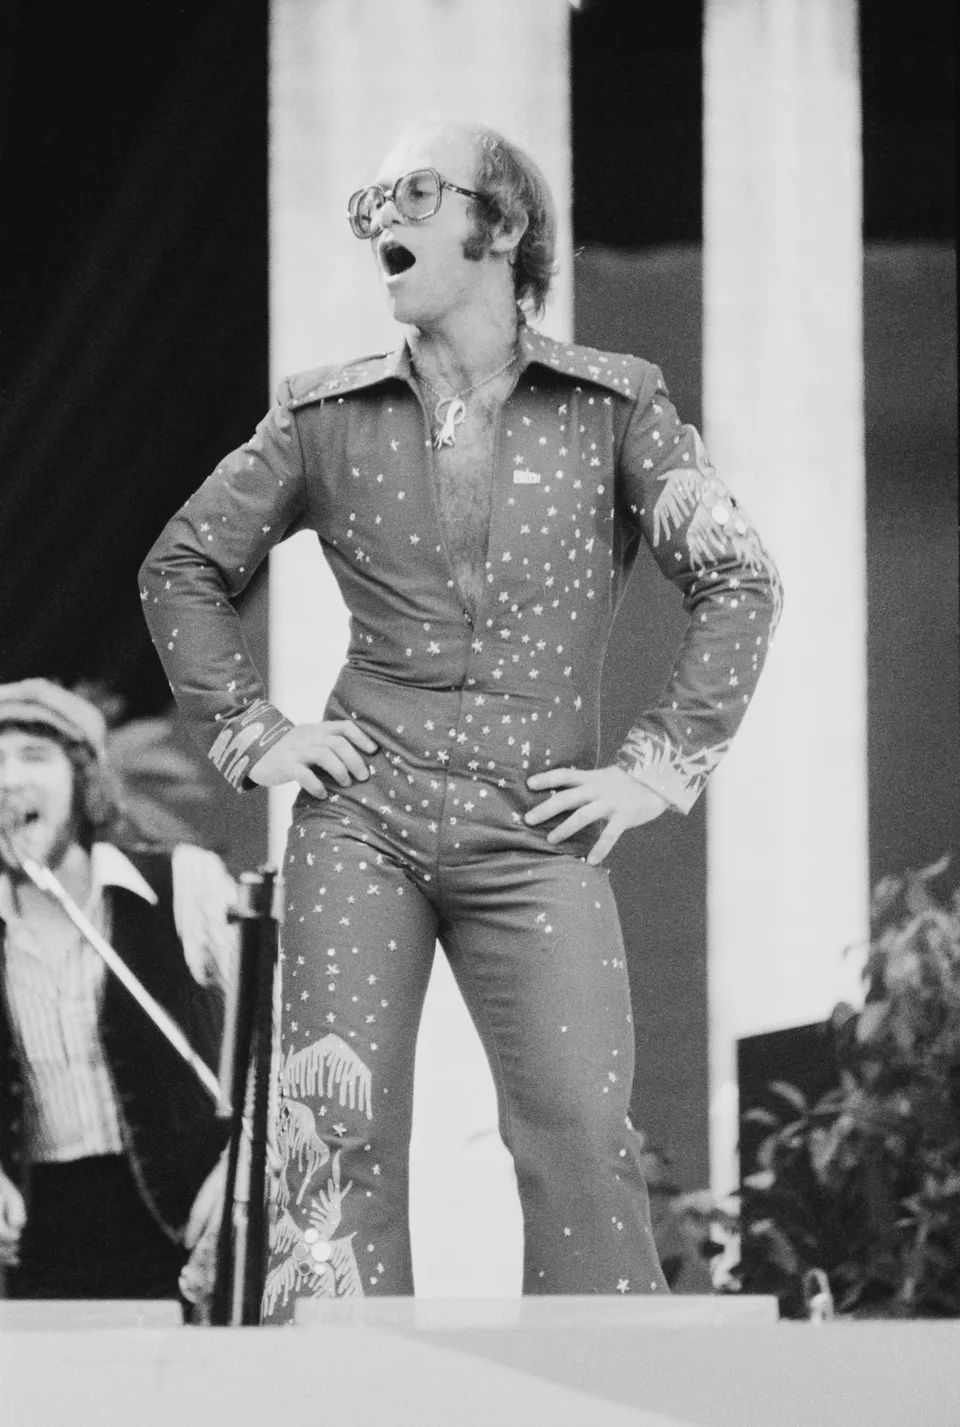 Elton John performs at the Midsummer Music one-day festival at Wembley Stadium in London, June 1975